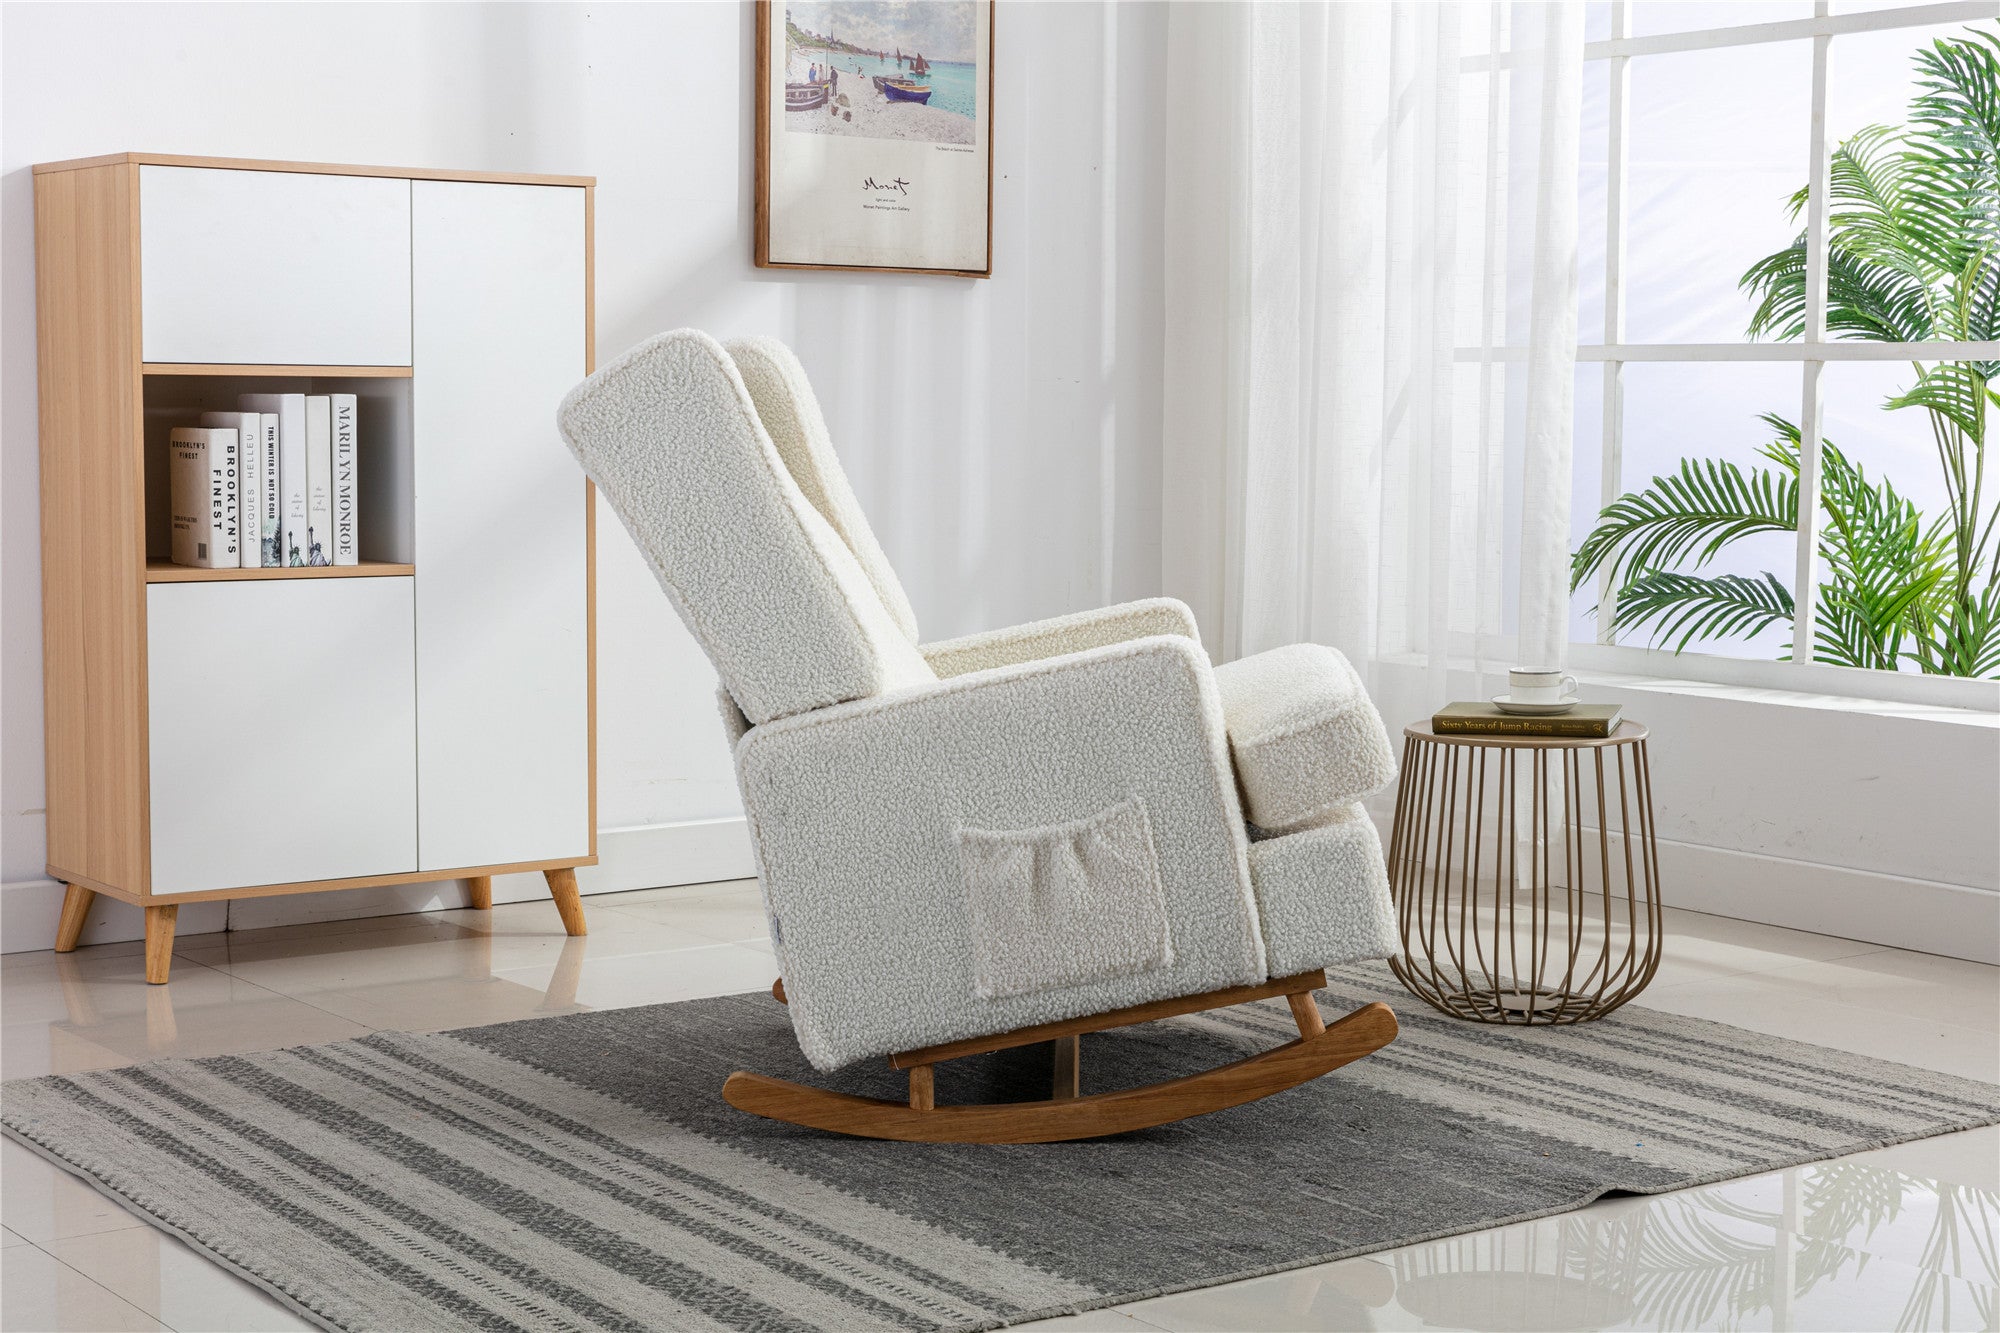 COOLMORE  living  room Comfortable  rocking chair  accent chair